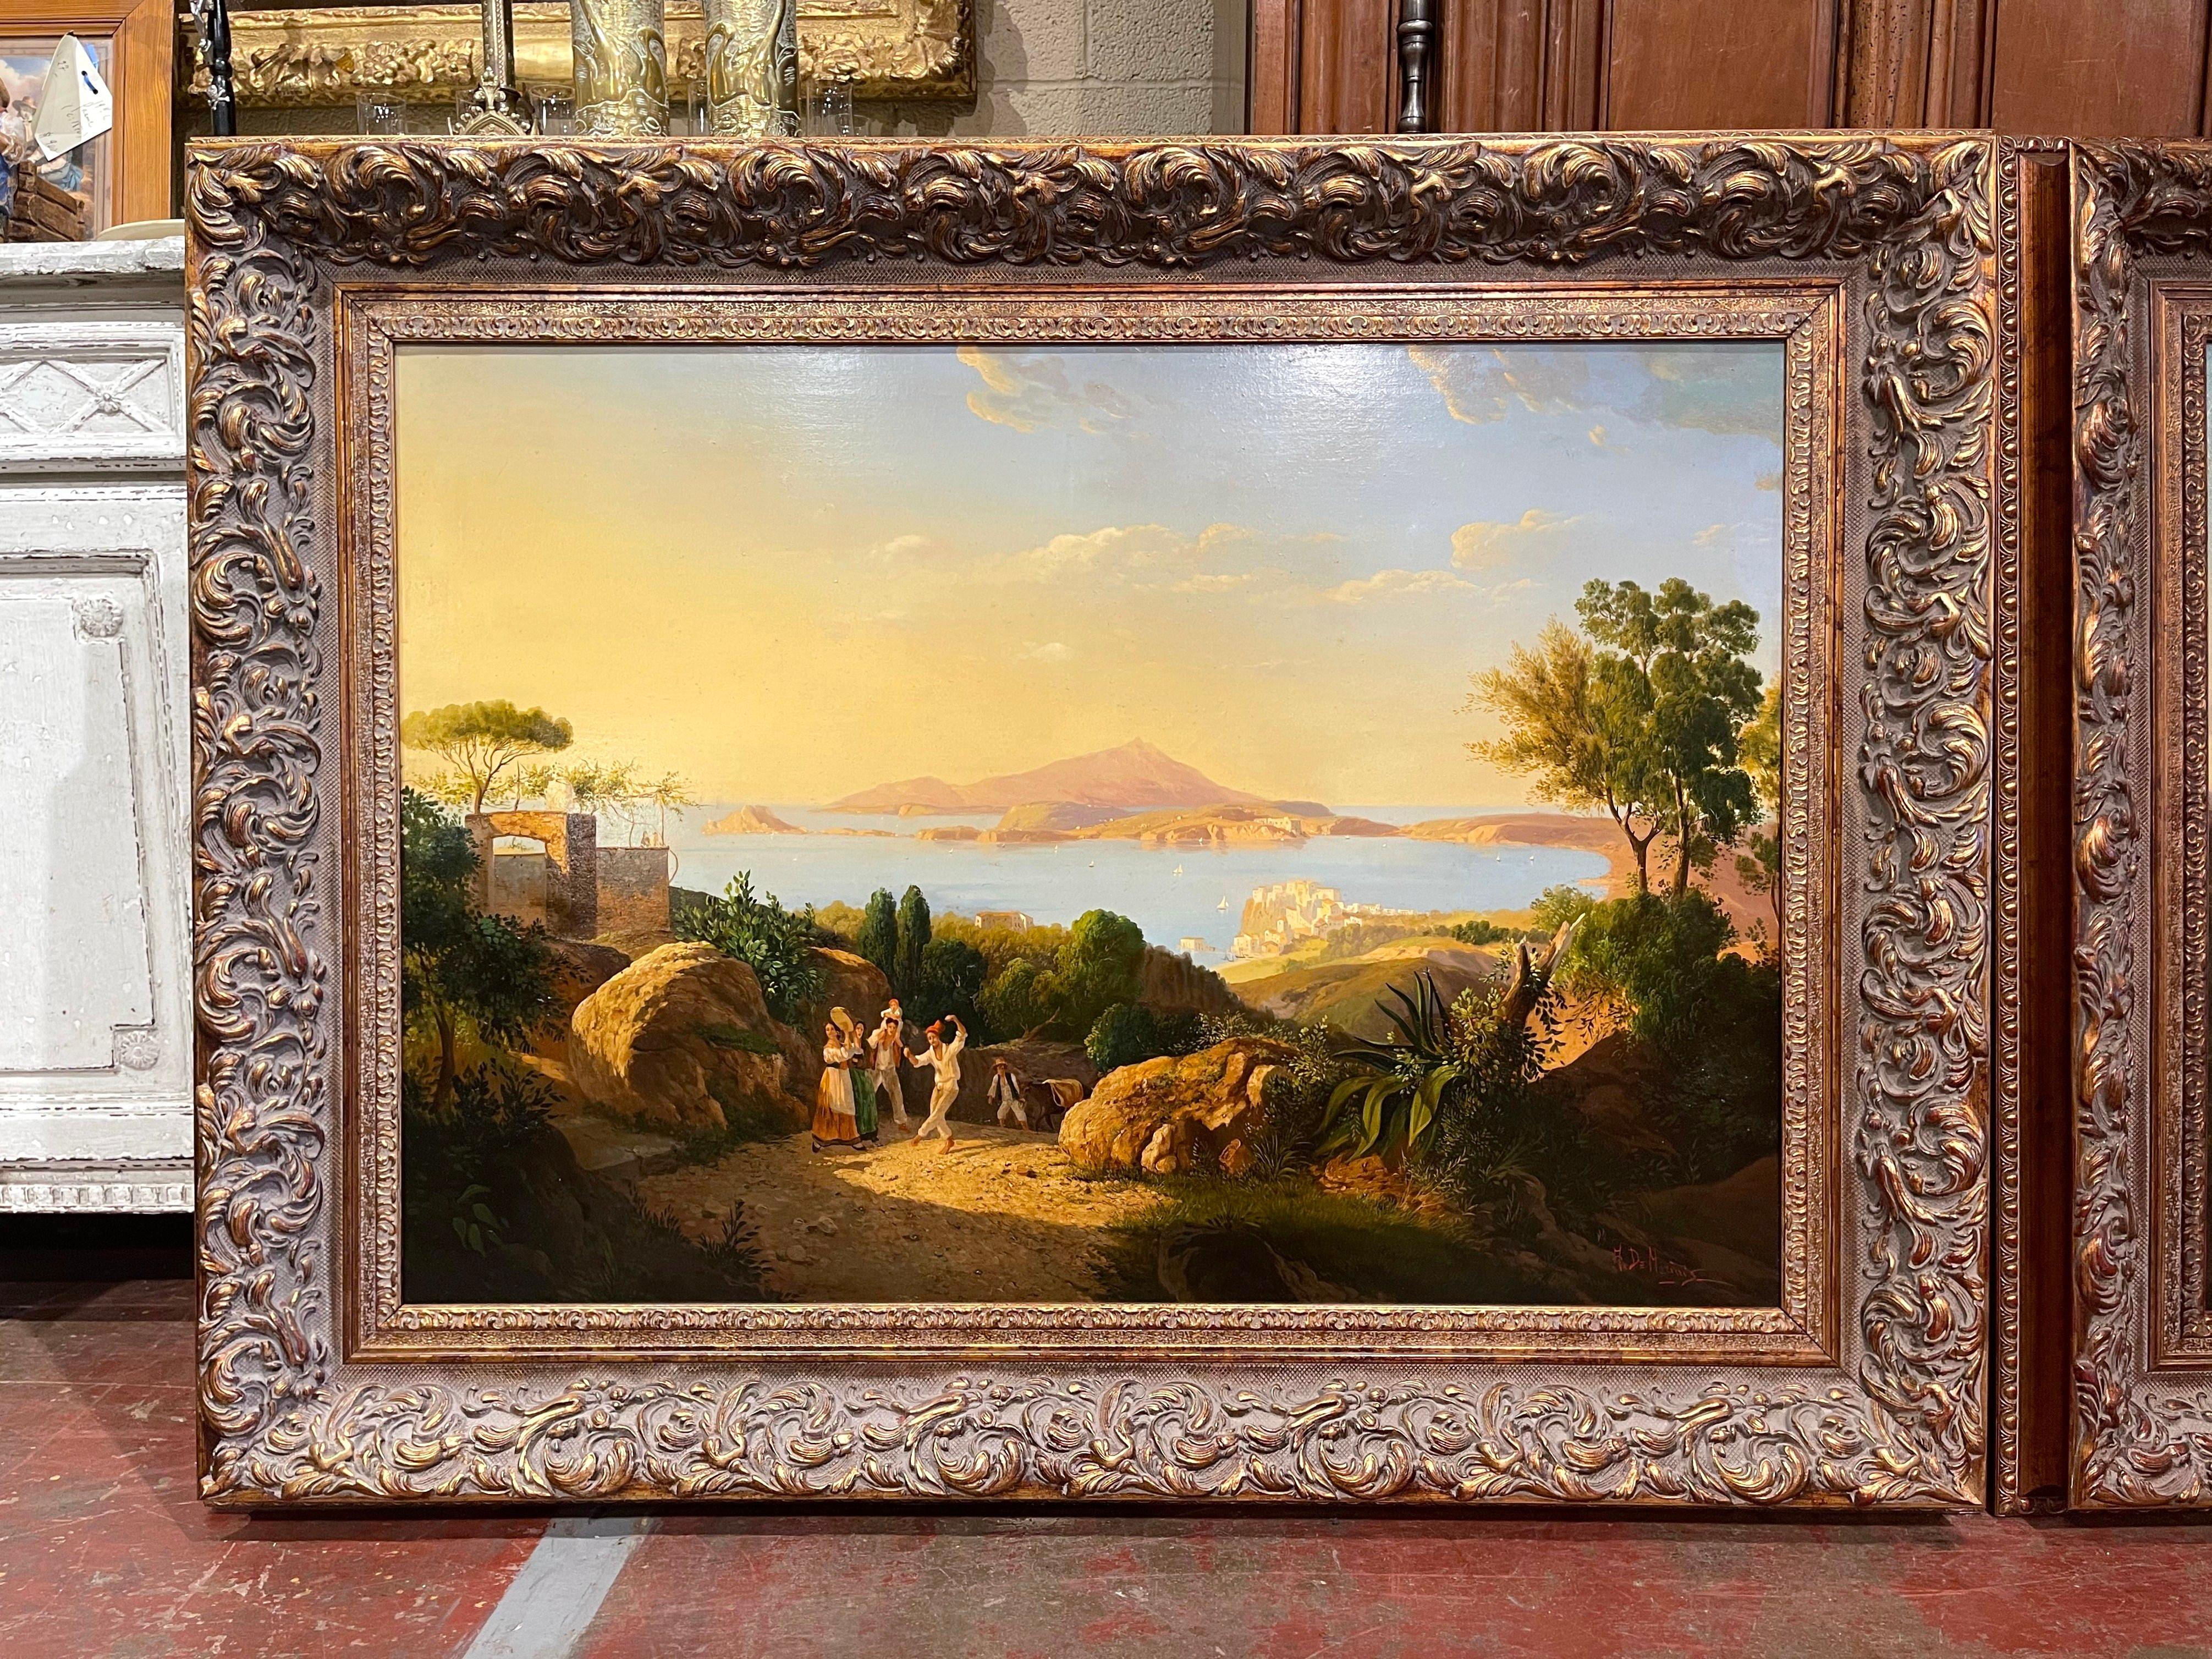 Set in ornate and carved gilt wood frames, these elegant oil on canvas paintings depict two Italian coastal scenes. Attracted to its dramatic vistas, volcanoes, exotic peasants, and classical ruins, landscape painters of the 18th and 19th centuries